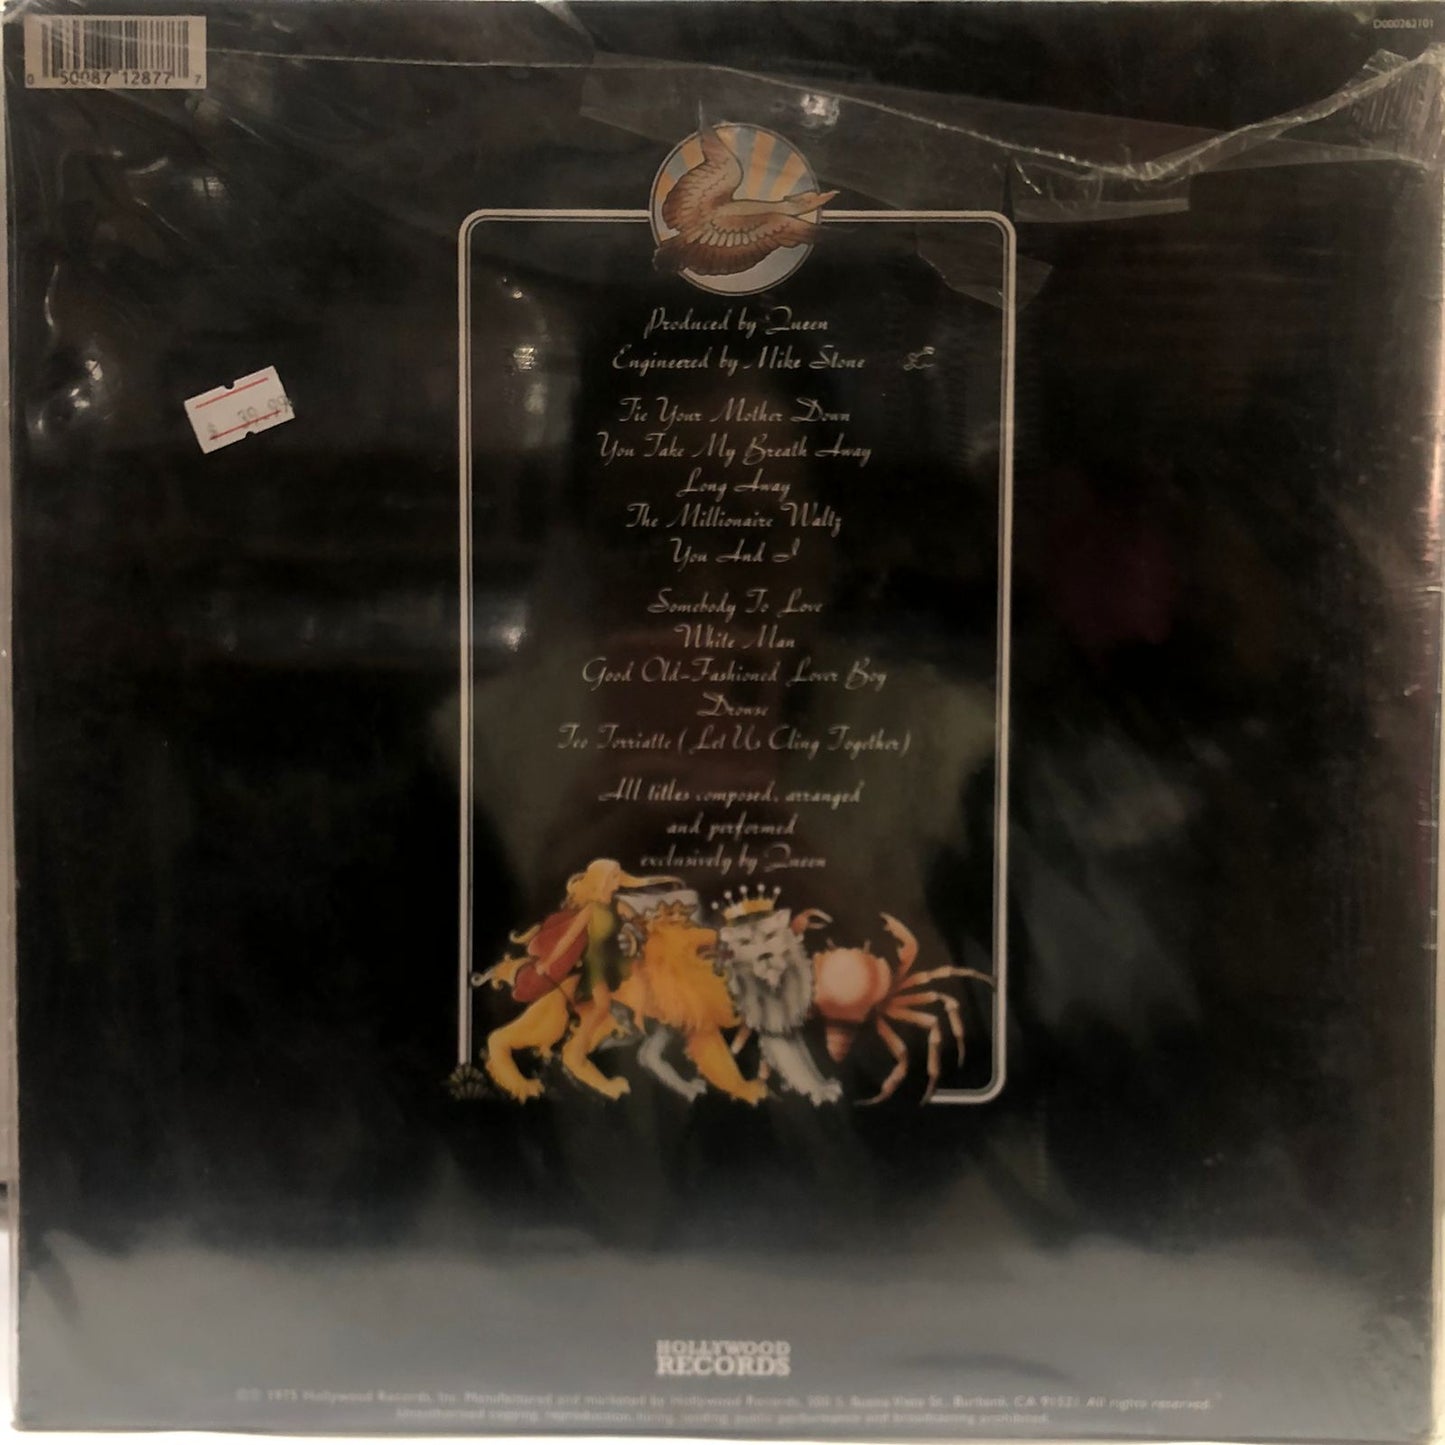 QUEEN - A DAY AT THE RACES  LP (USED)